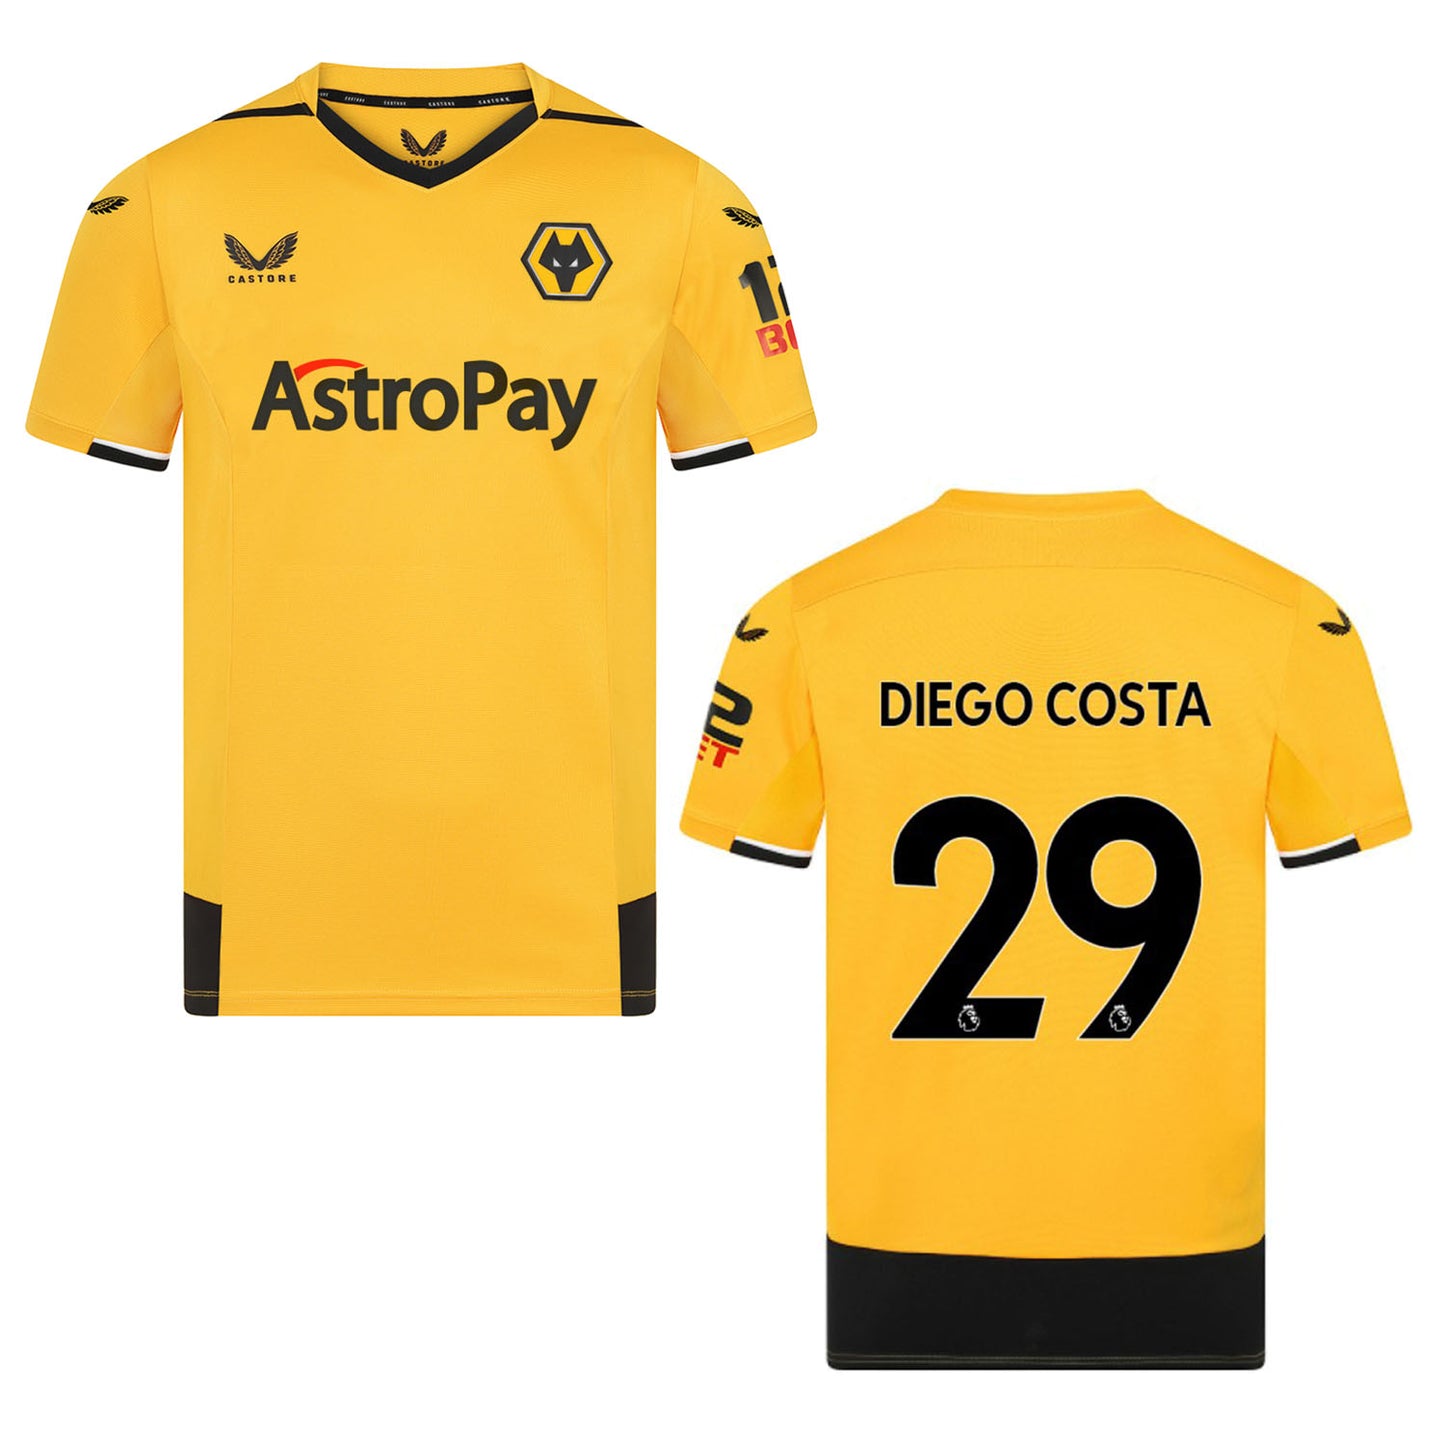 Diego Costa Wolves 29 Jersey